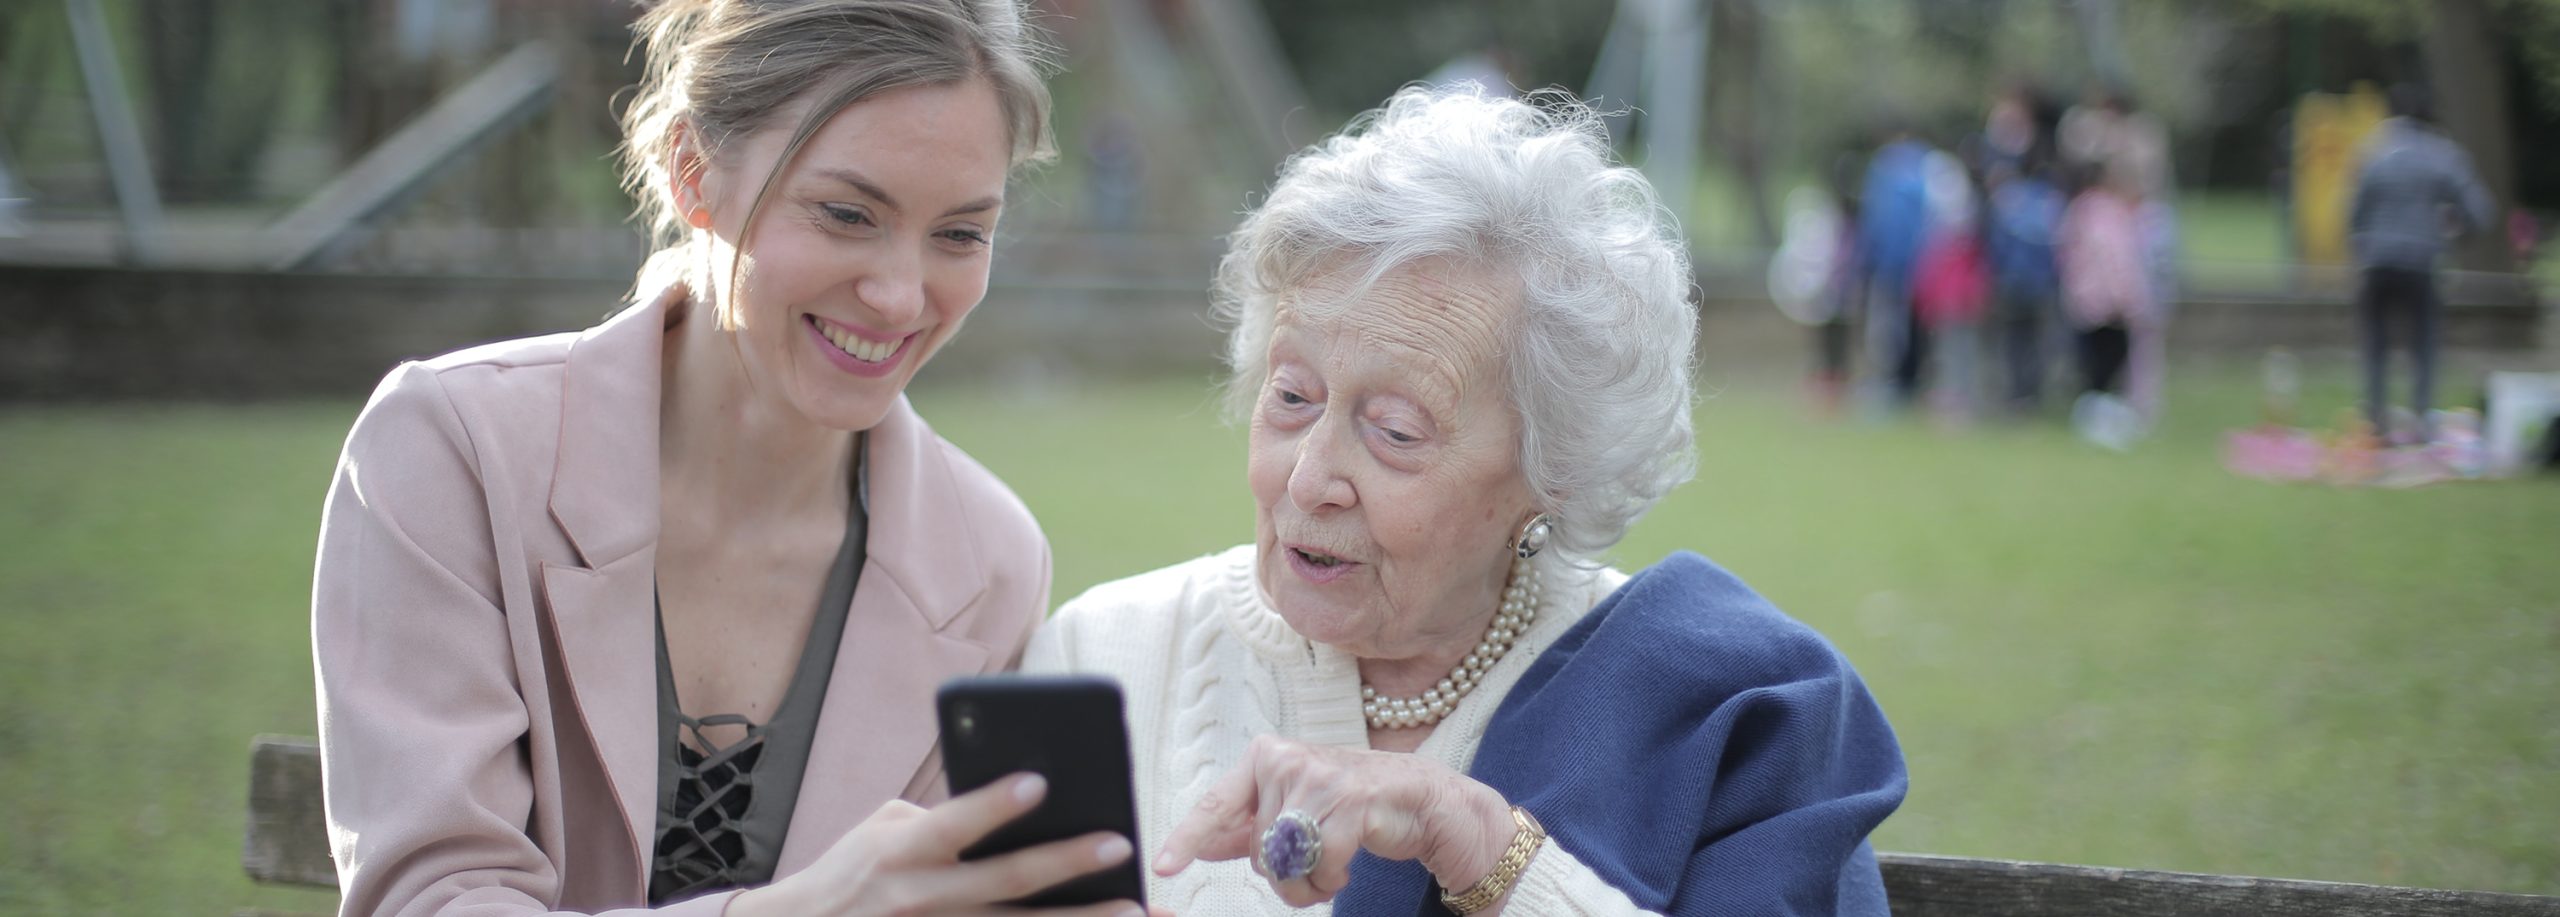 woman showing photo to elderly woman